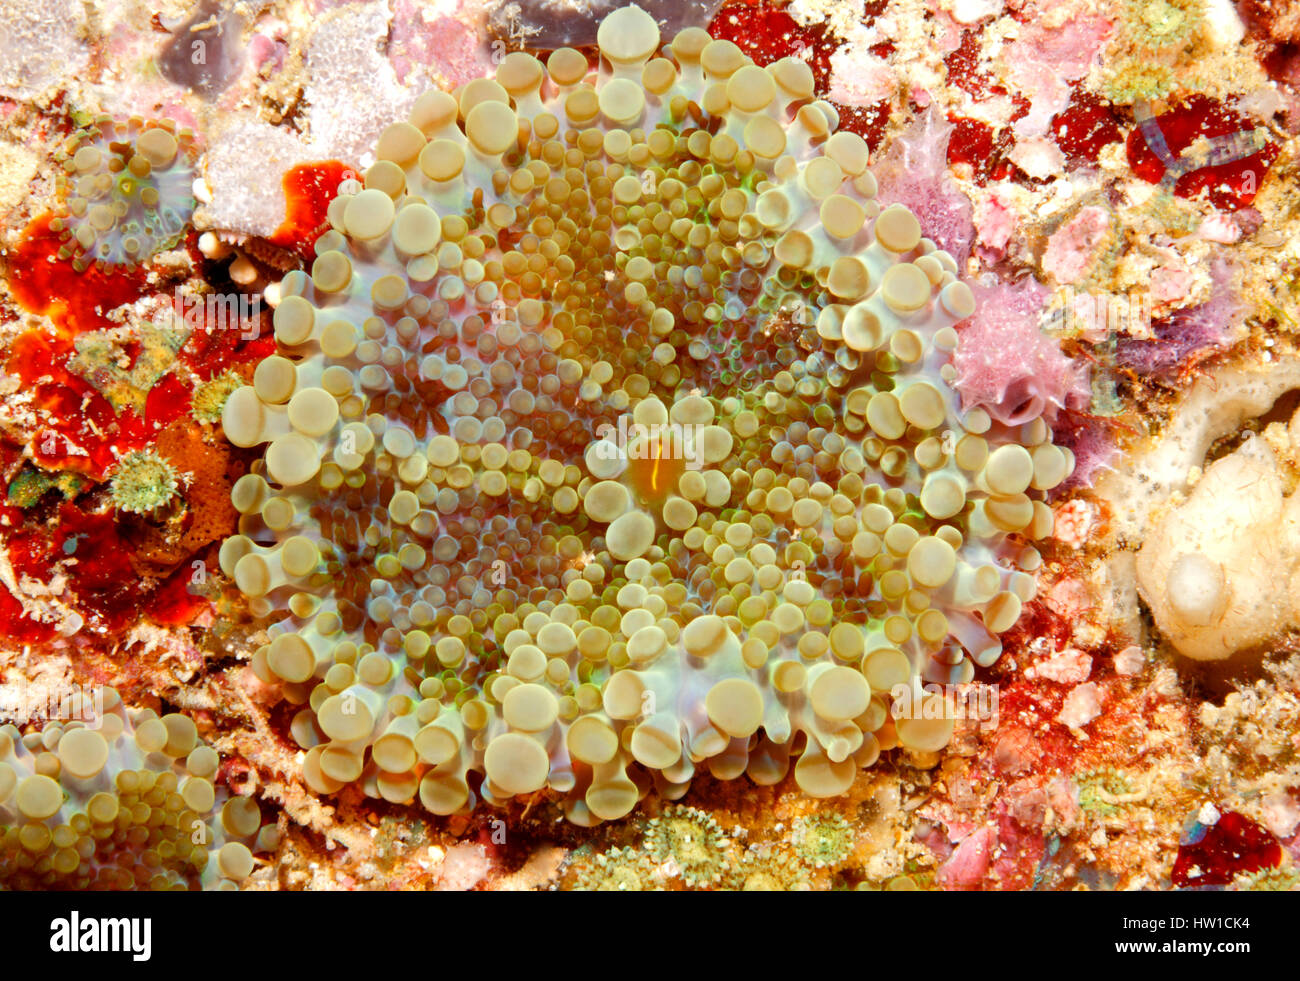 Corallimorpharian, or Corallimorph, Discosoma sp or Actinodiscus sp, on the reef. Stock Photo